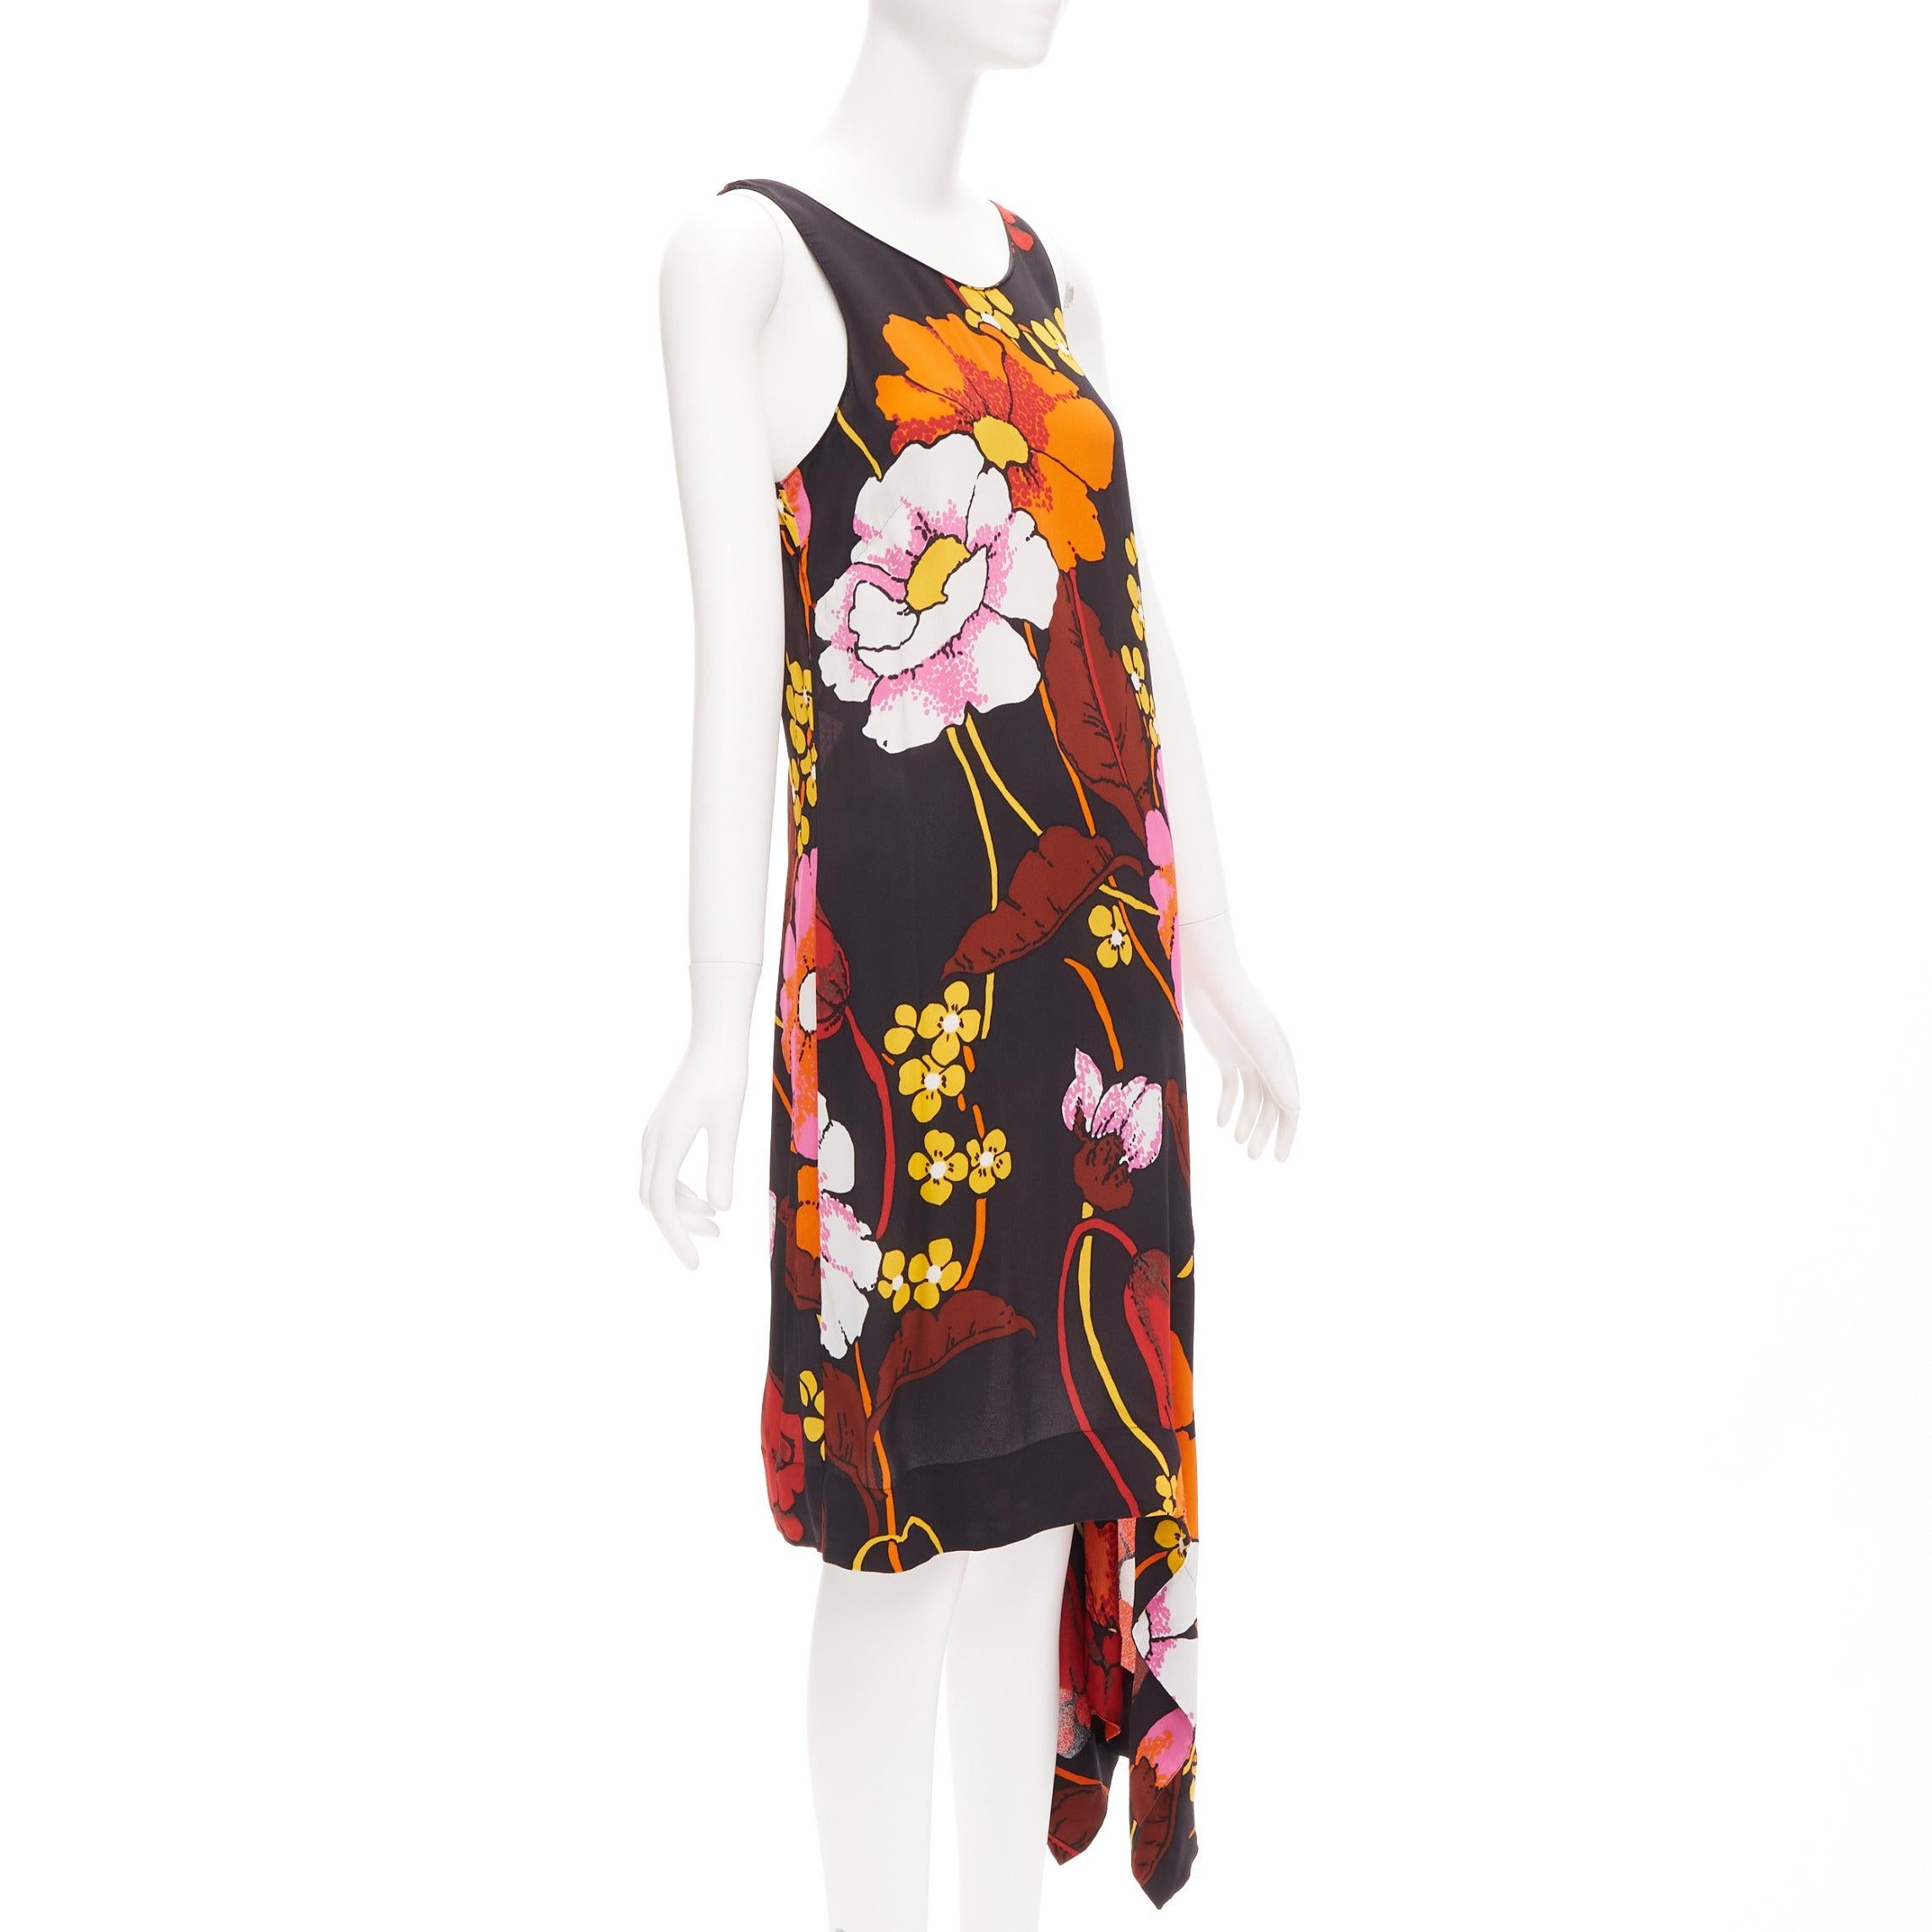 MARNI black oversied floral print drape handkerchief hem sleeveless dress IT42 M
Reference: CELG/A00273
Brand: Marni
Material: Viscose
Color: Black, Multicolour
Pattern: Floral
Closure: Slip On
Made in: Italy

CONDITION:
Condition: Excellent, this